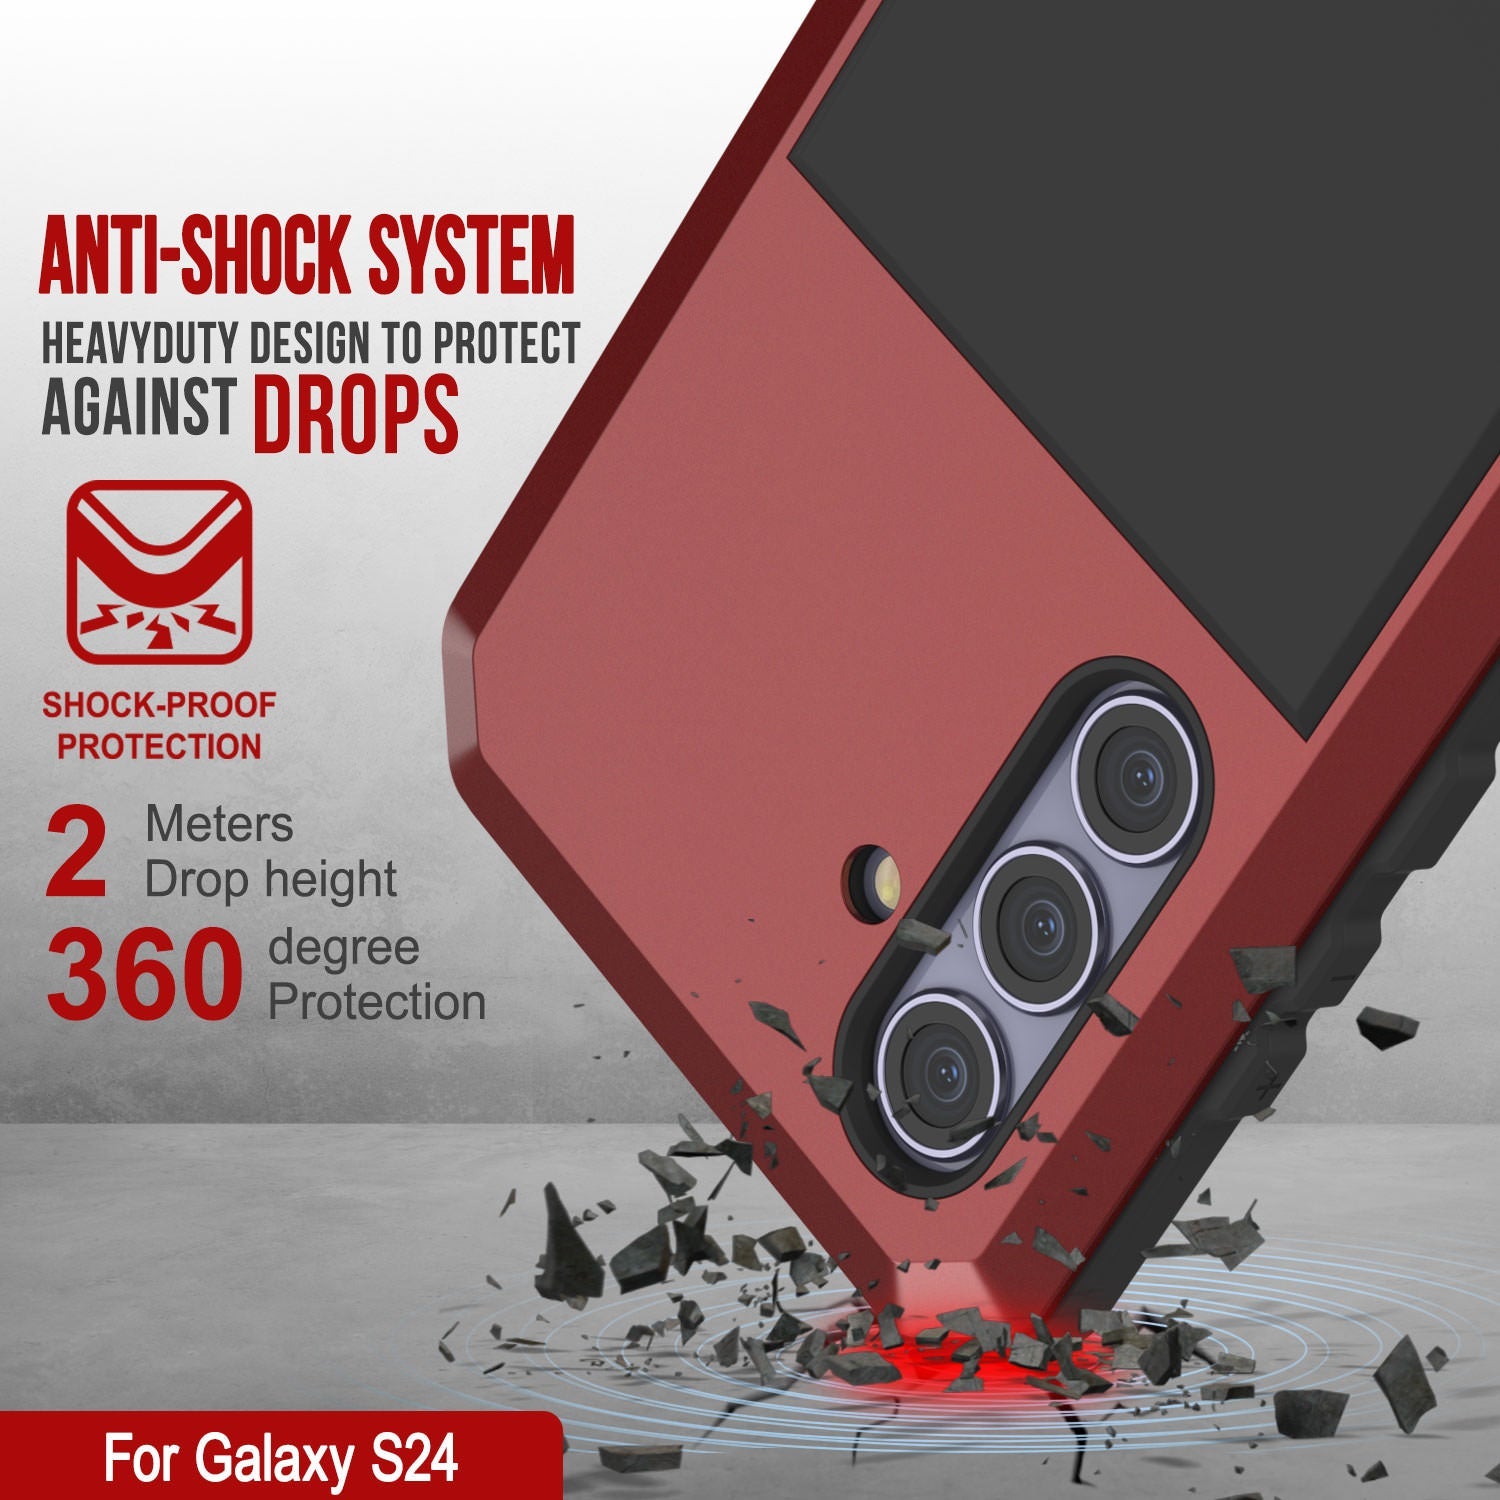 Galaxy S24 Metal Case, Heavy Duty Military Grade Armor Cover [shock proof] Full Body Hard [Red]